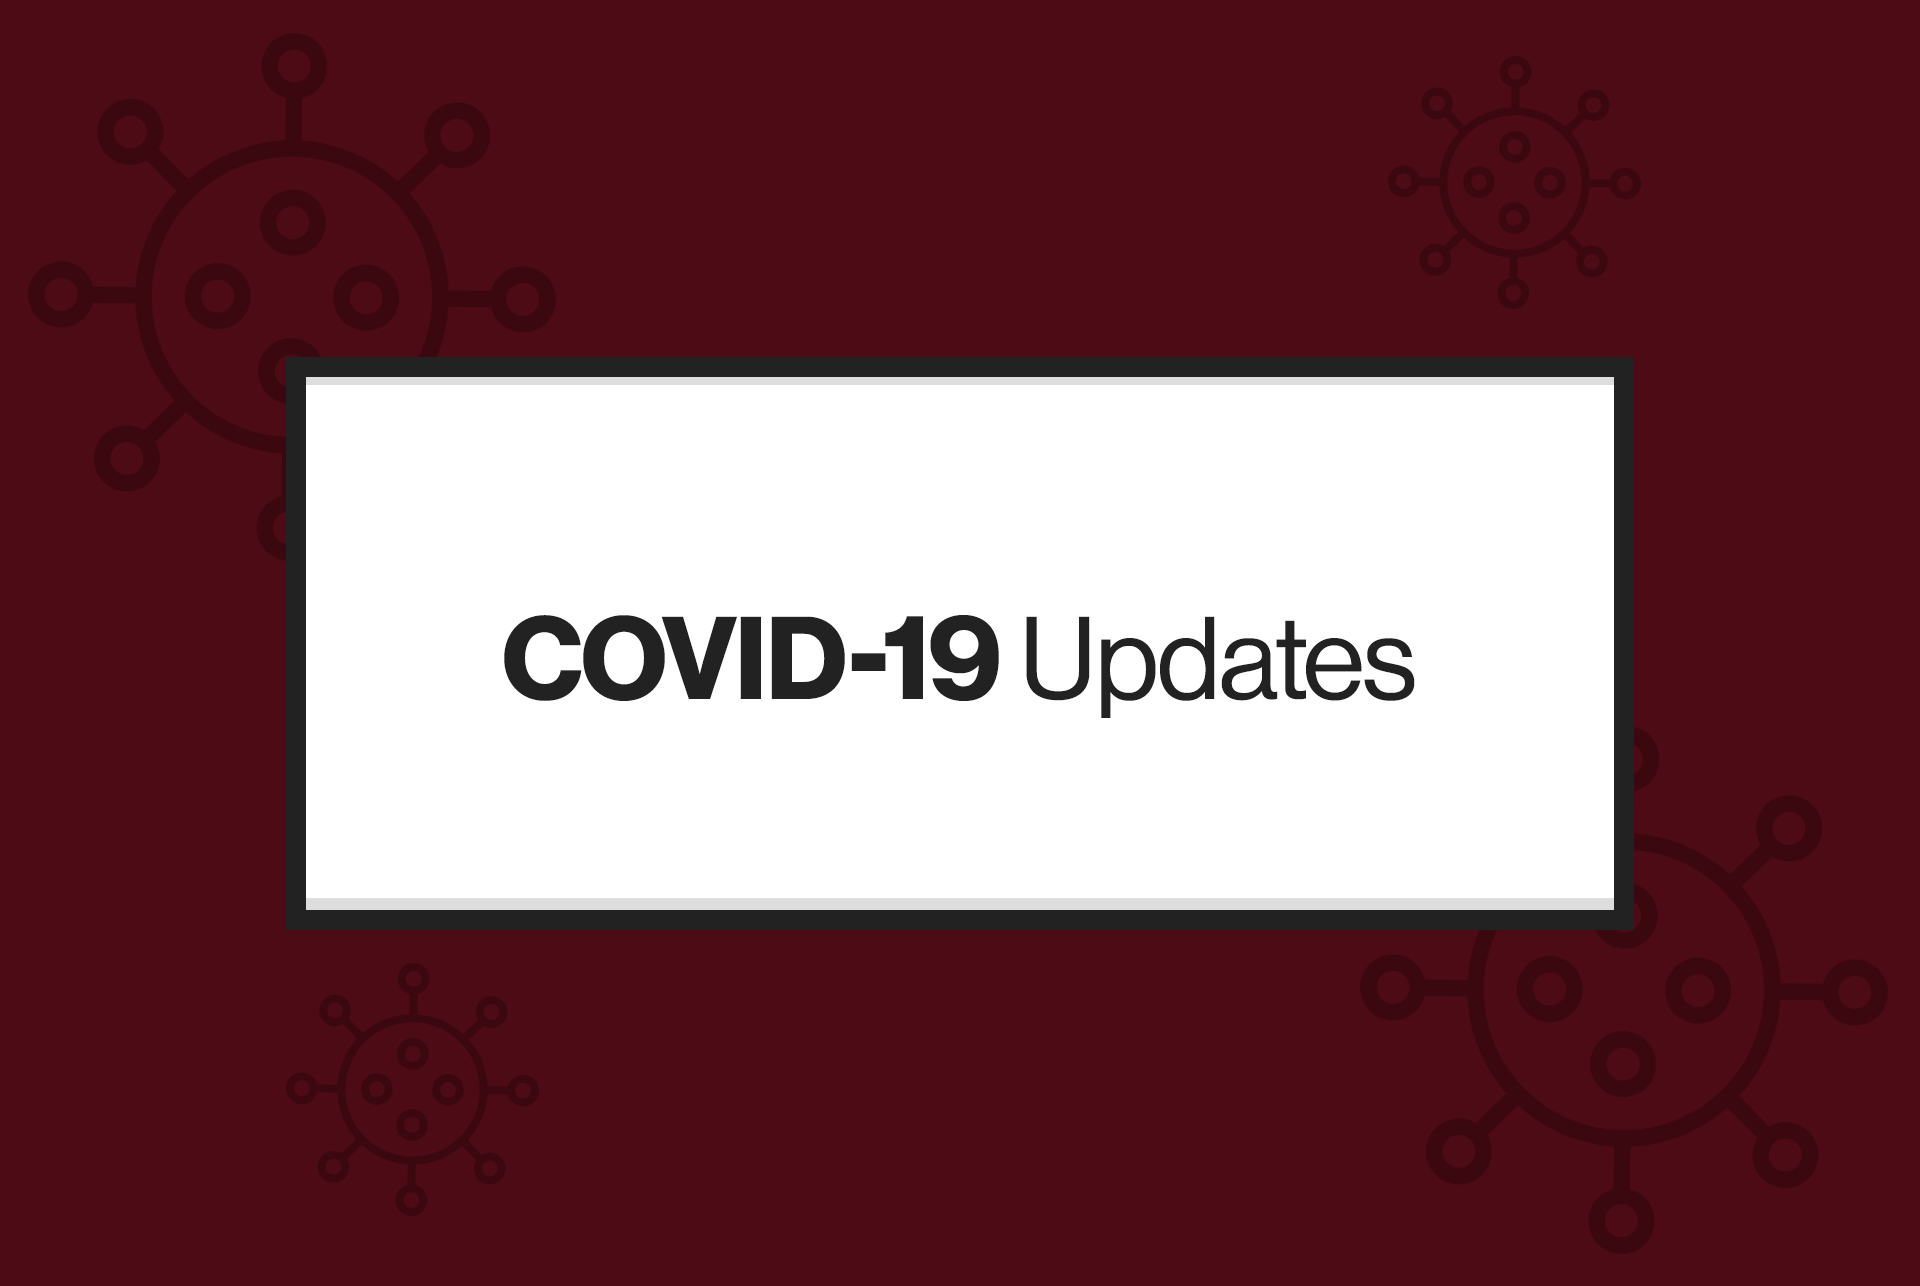 Text reading "COVID-19 Updates" on maroon and white background